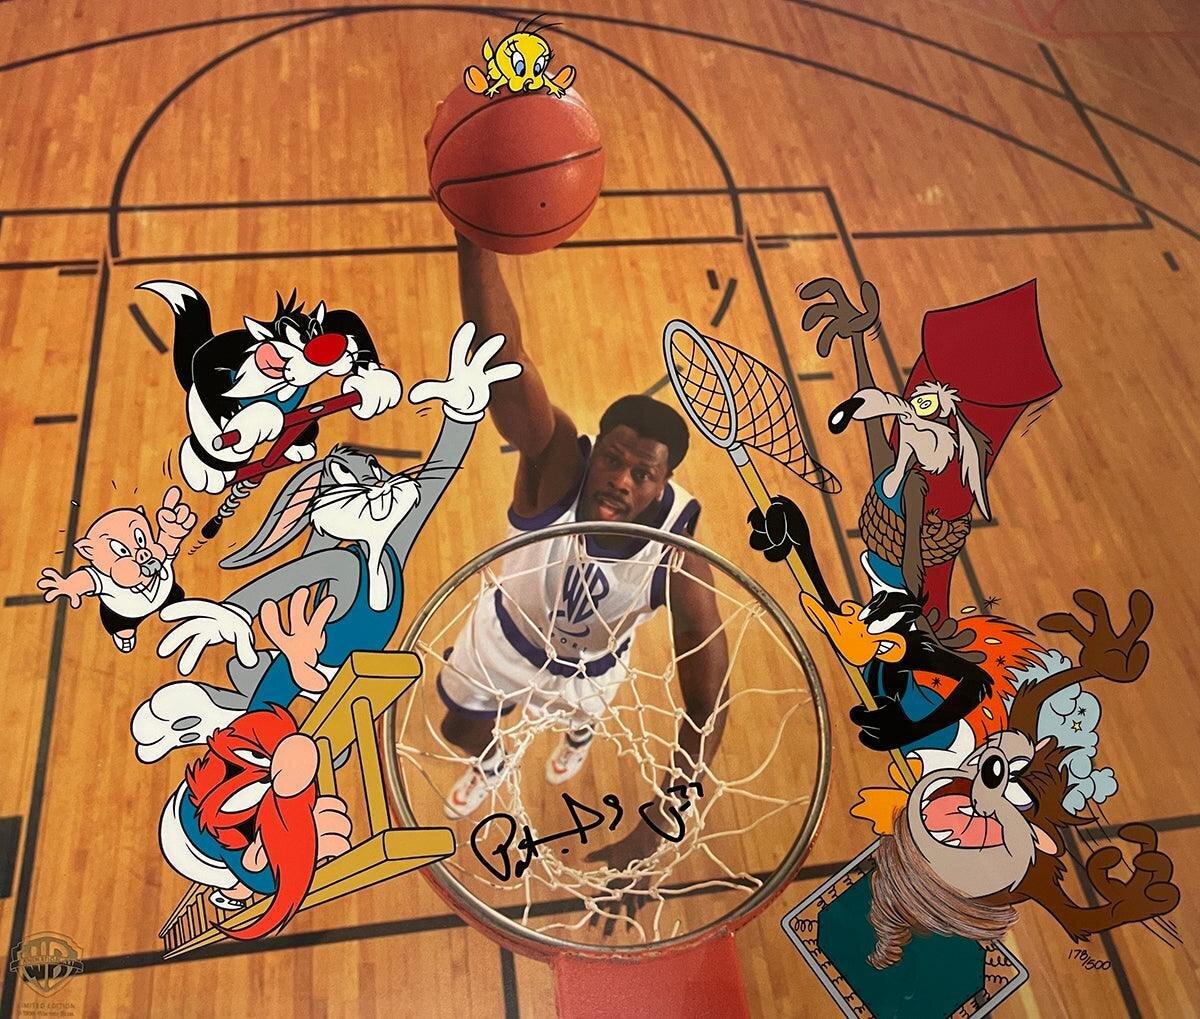 The Legendary Big Man Signed By Patrick Ewing - Art by Looney Tunes Studio Artists